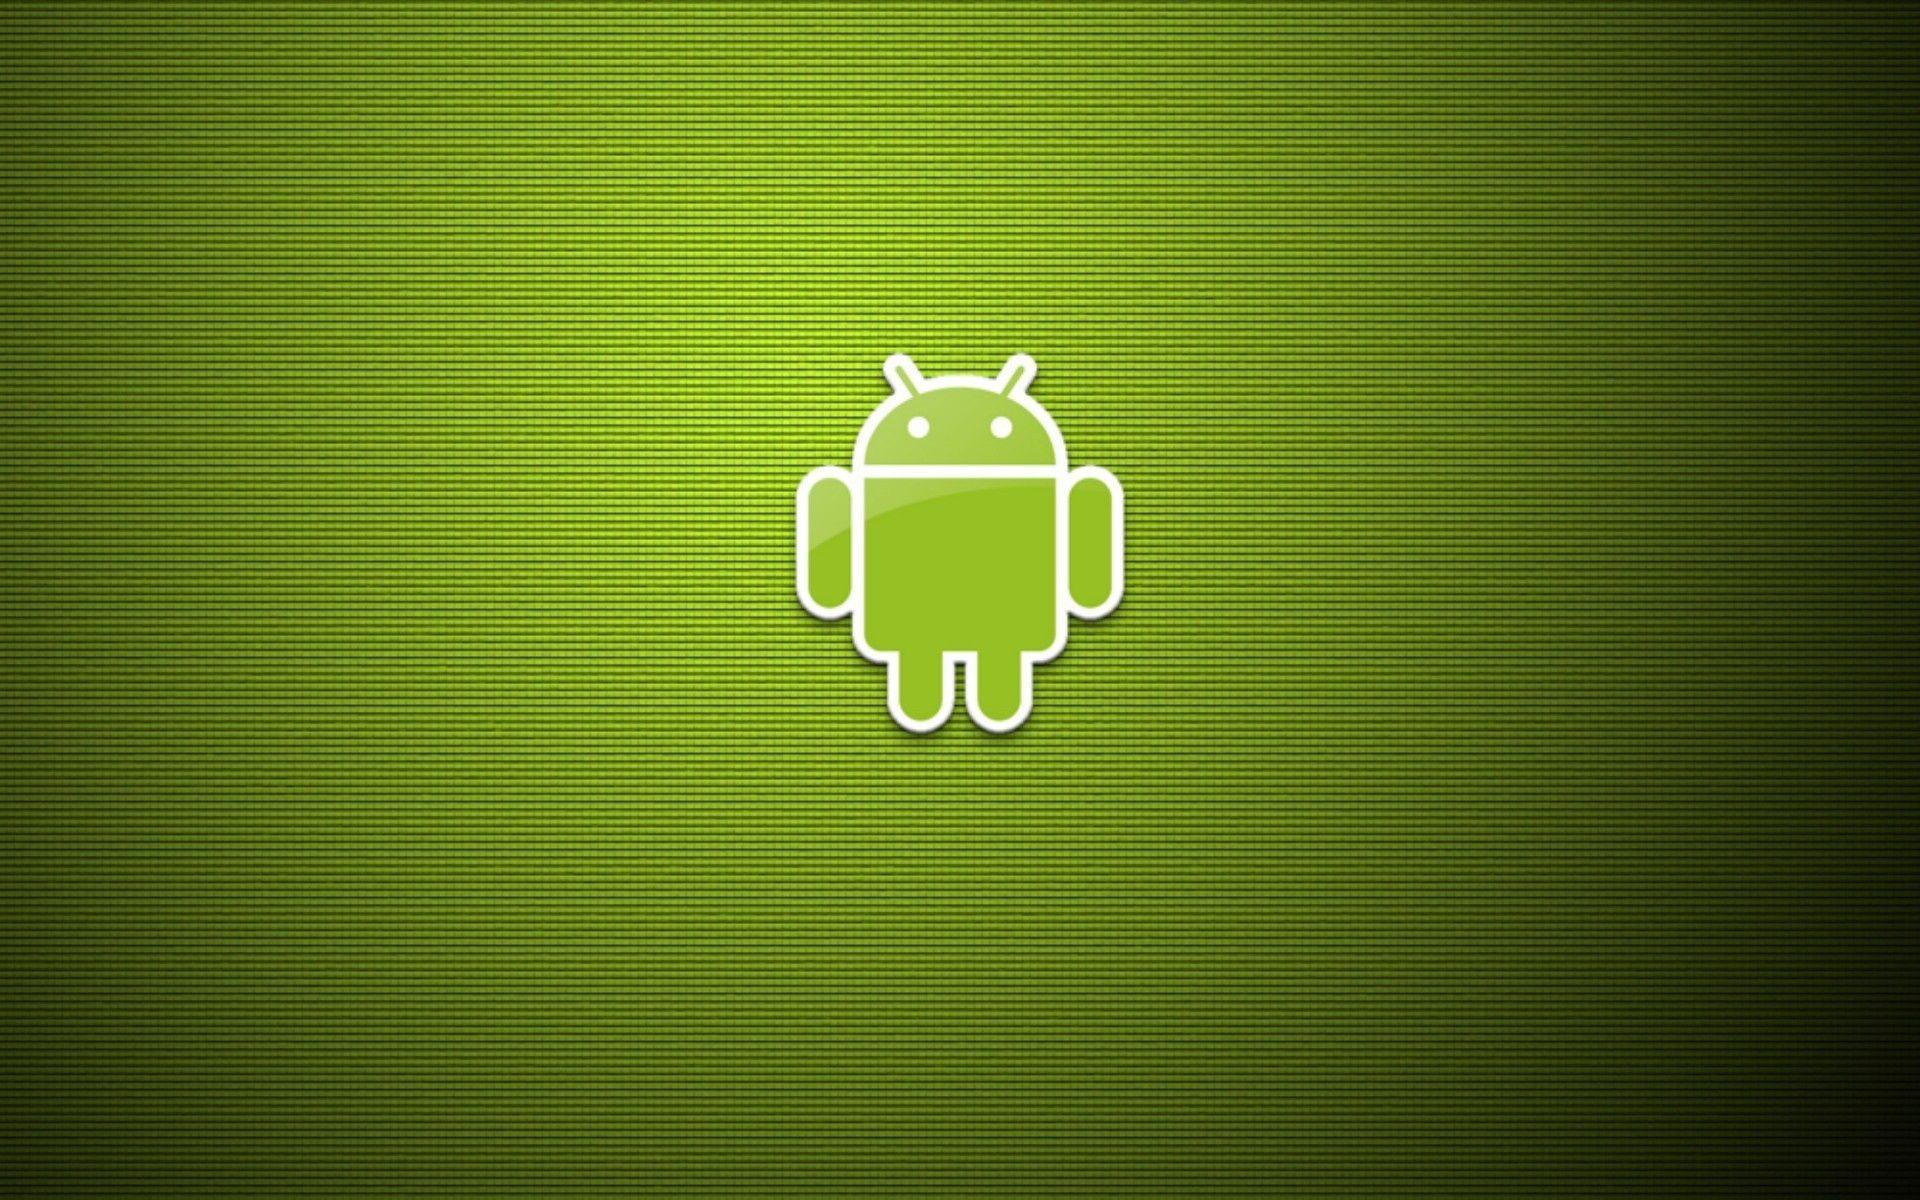 Android Logo Wallpaper HD wallpaper search